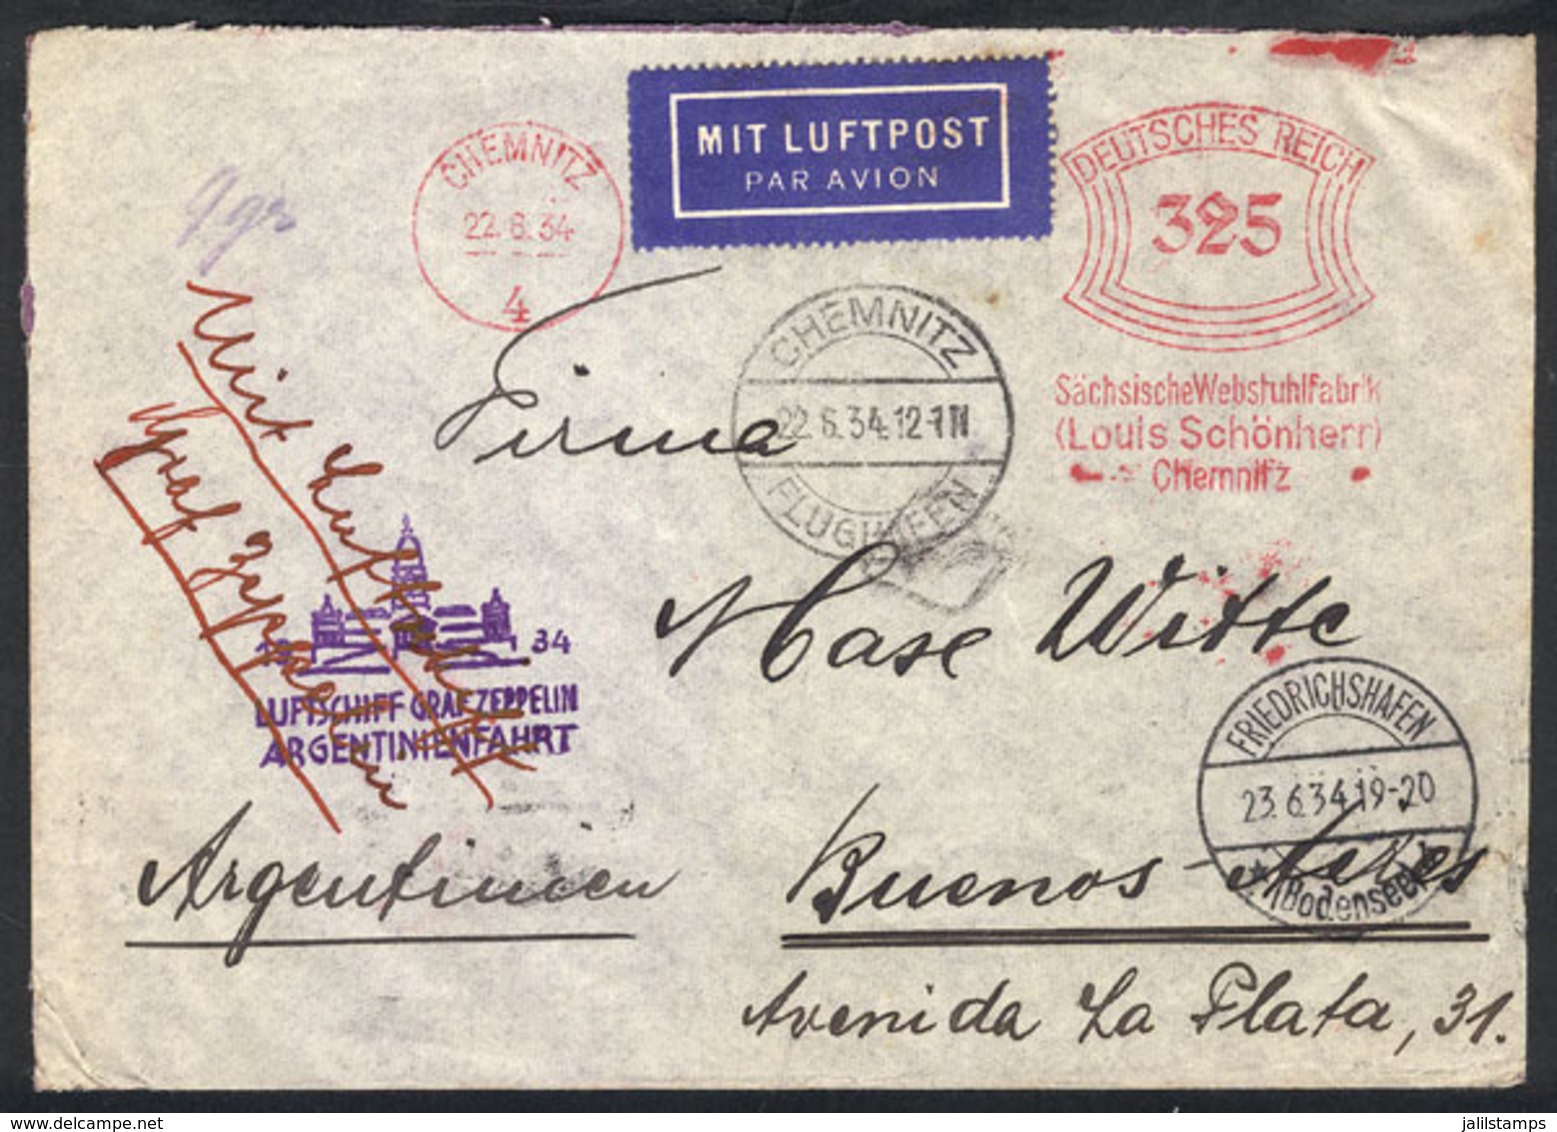 GERMANY: 22/JUN/1934 Chemnitz - Argentina: Cover With Meter Postage Flown By Zeppelin To Buenos Aires (arrival Backstamp - Vorphilatelie